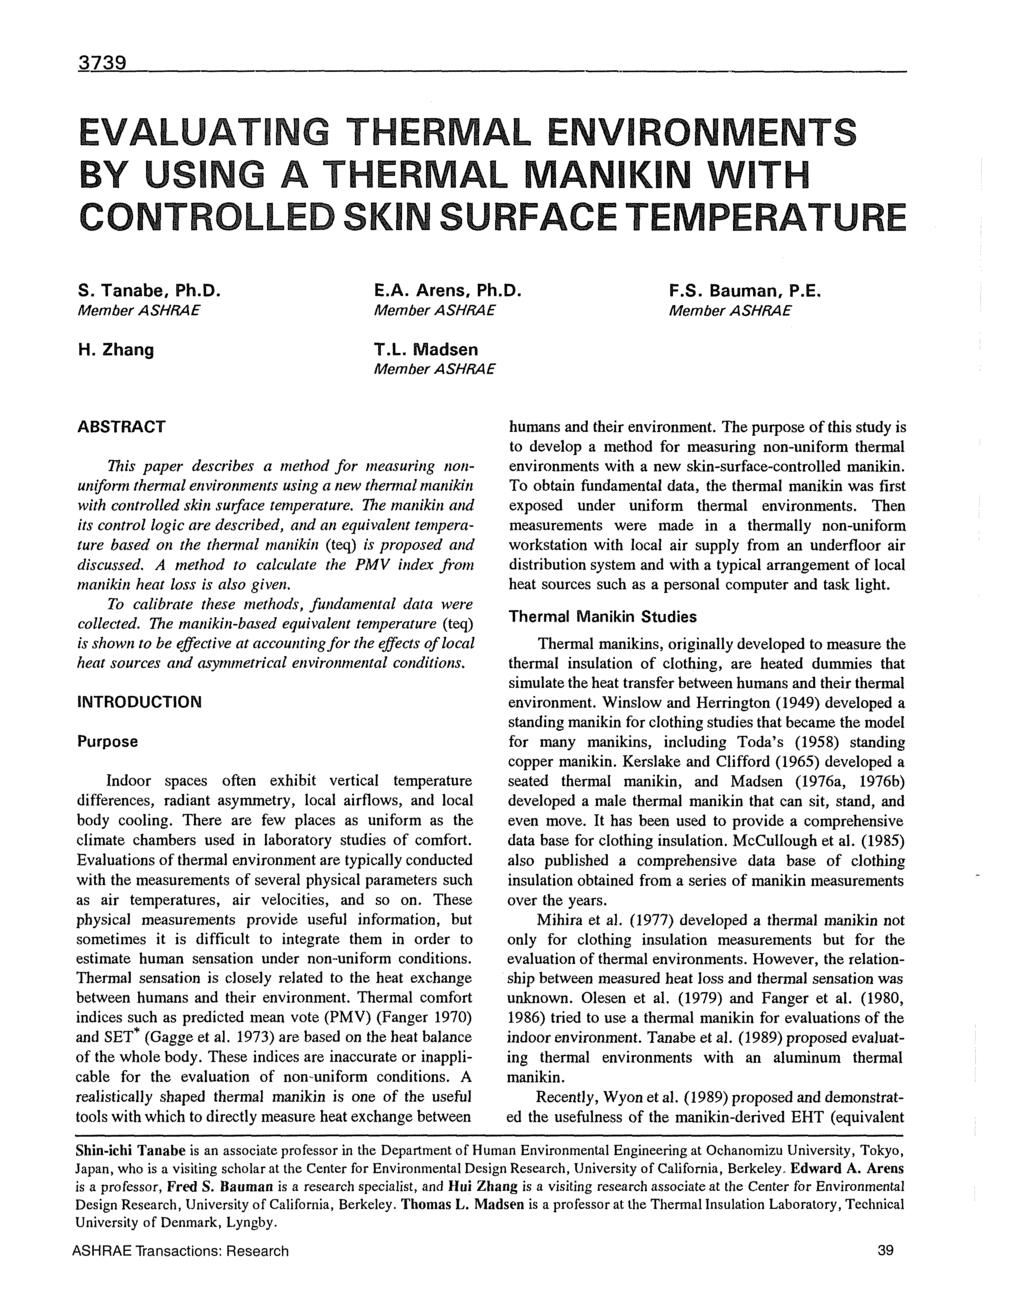 3739 EVALUATING THERMAL ENVIRONMENTS BY USING A THERMAL MANiKiN WiTH CONTROLLED SKiN SURFACE TEMPERATURE S. Tanabe, Ph.D. Member ASHRAE E.A. Arens, Ph.D. Member ASHRAE F.S. Bauman, P.E. Member ASHRAE H.